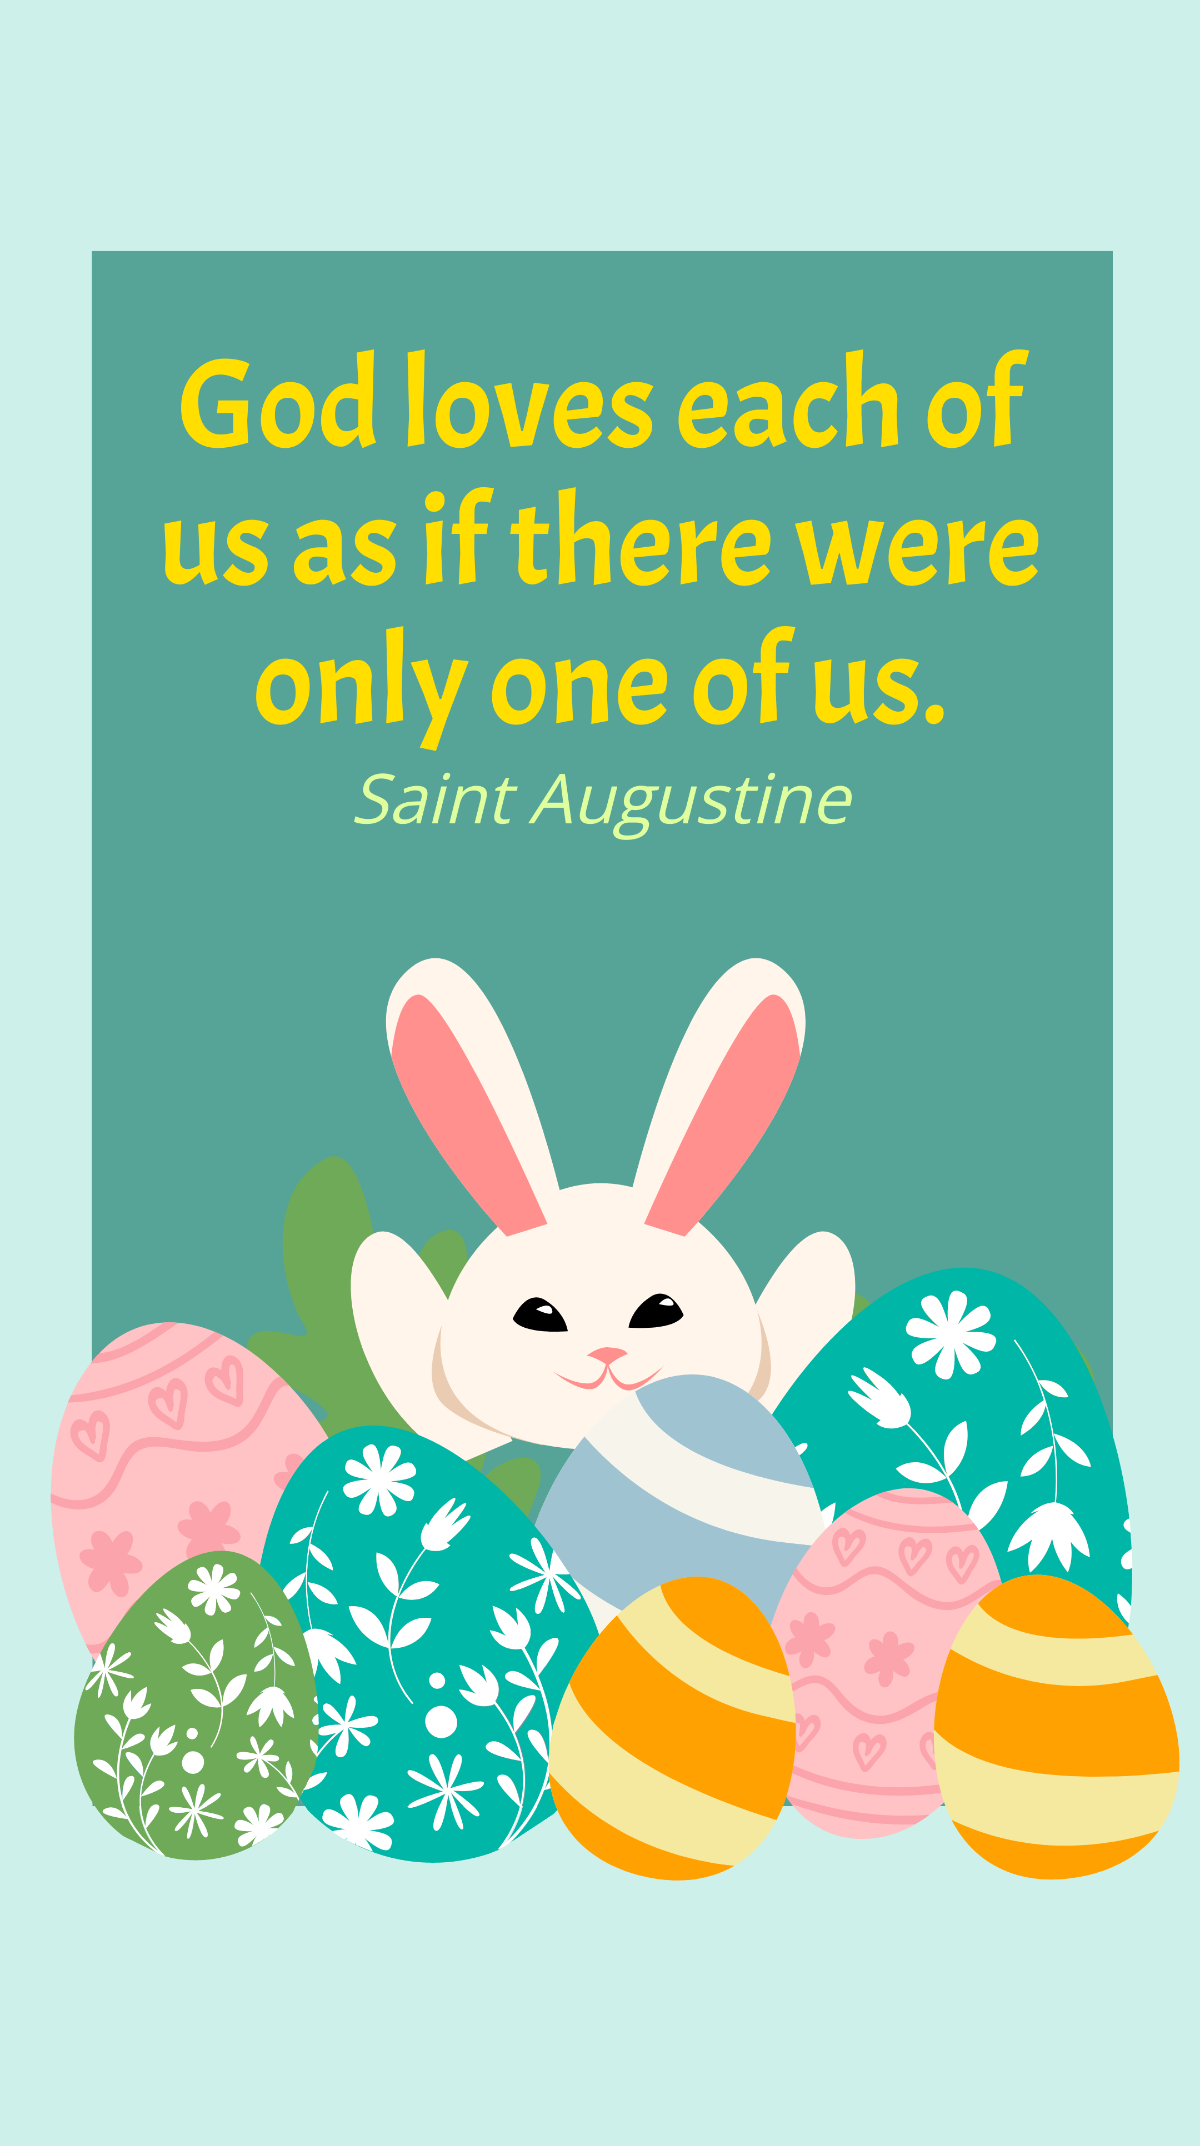 Saint Augustine - God loves each of us as if there were only one of us. Template